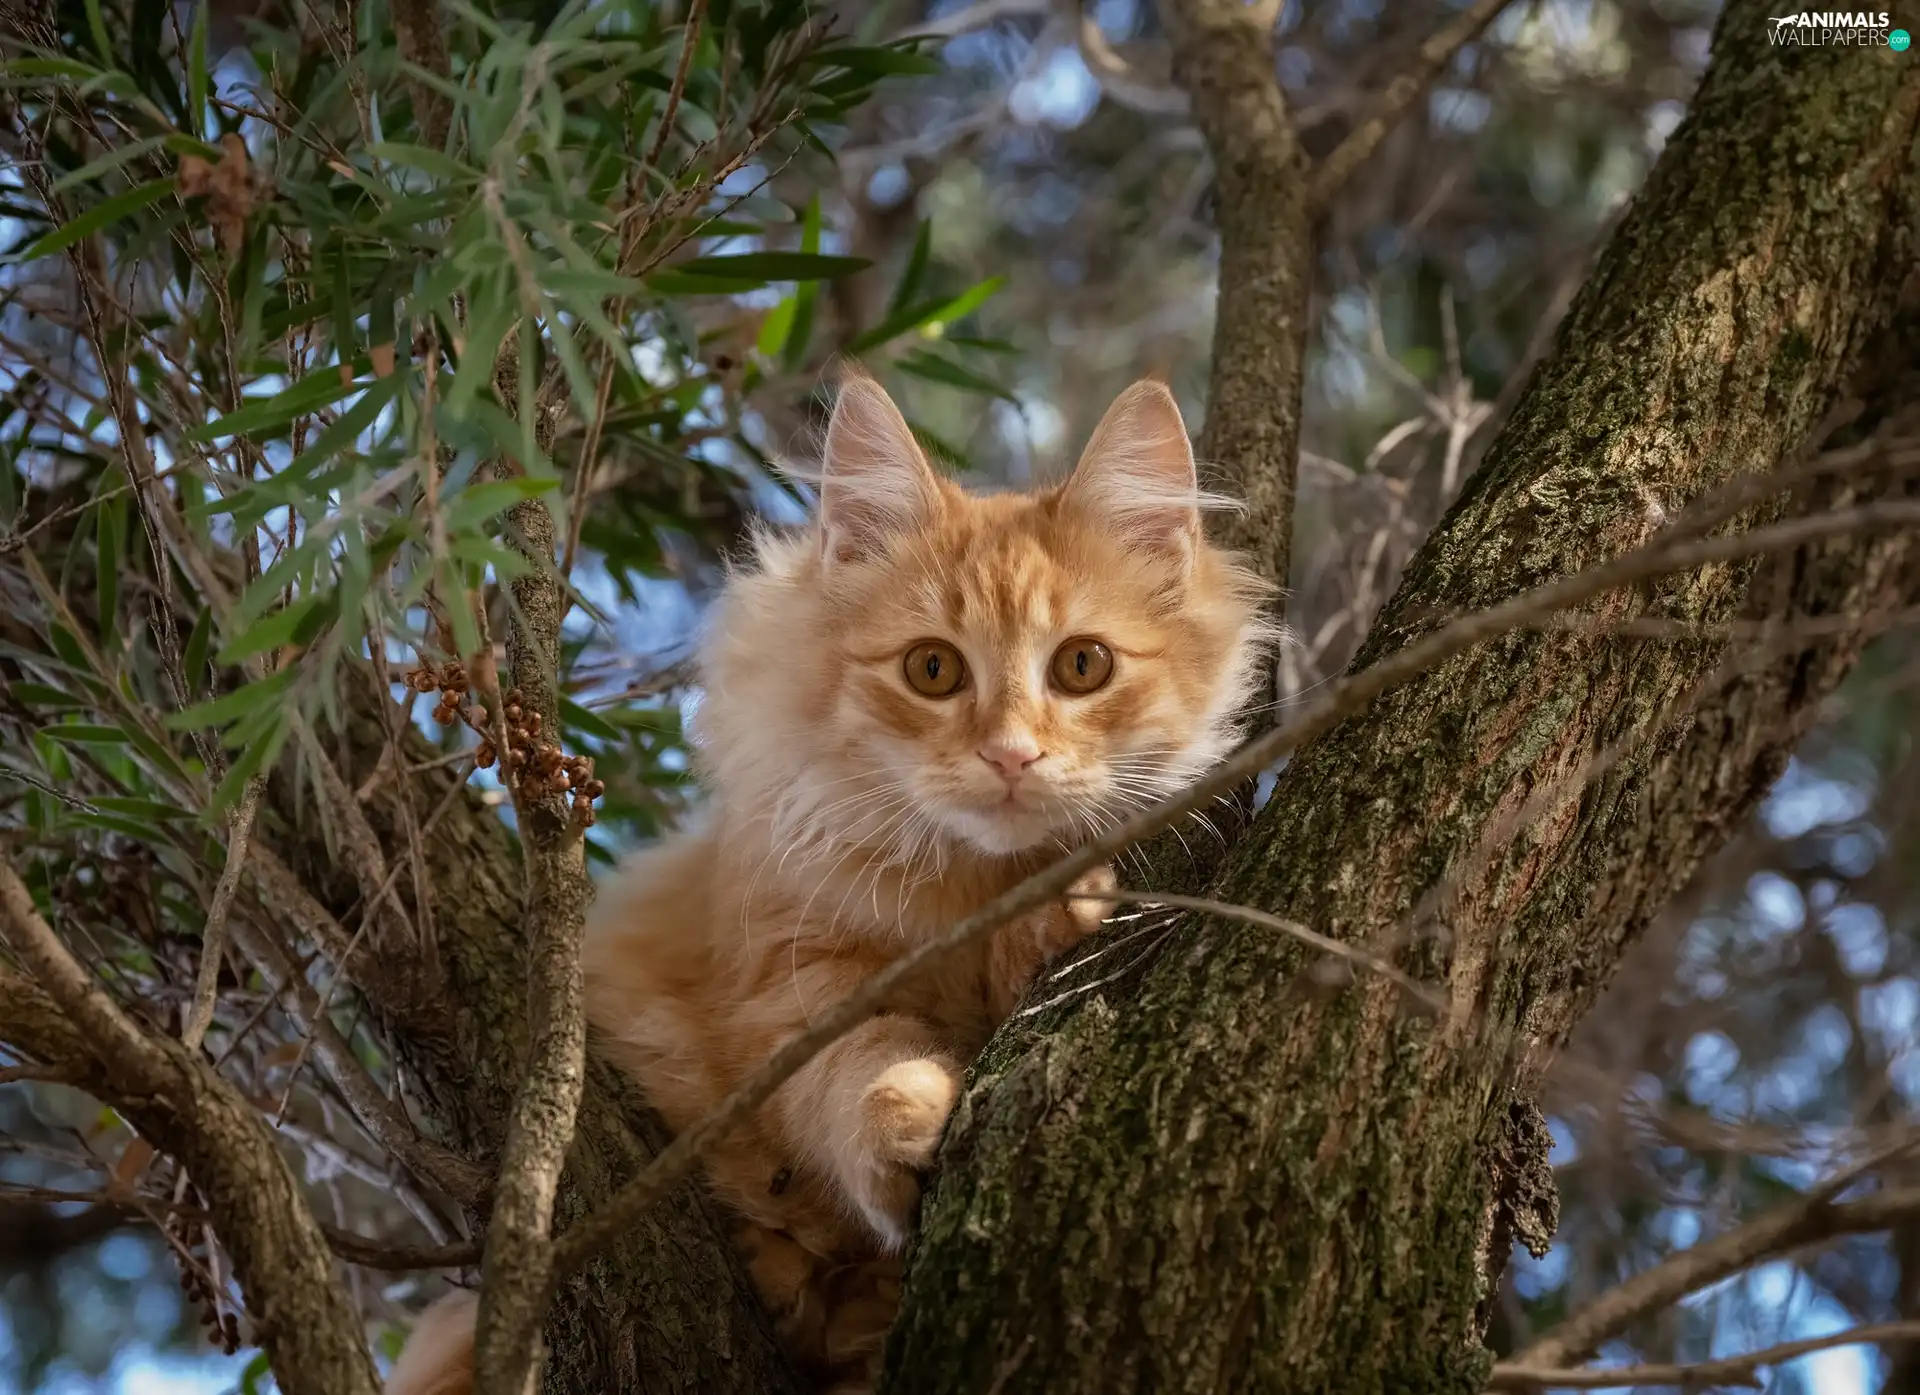 Lod on the beach, trees, cat, The look, ginger